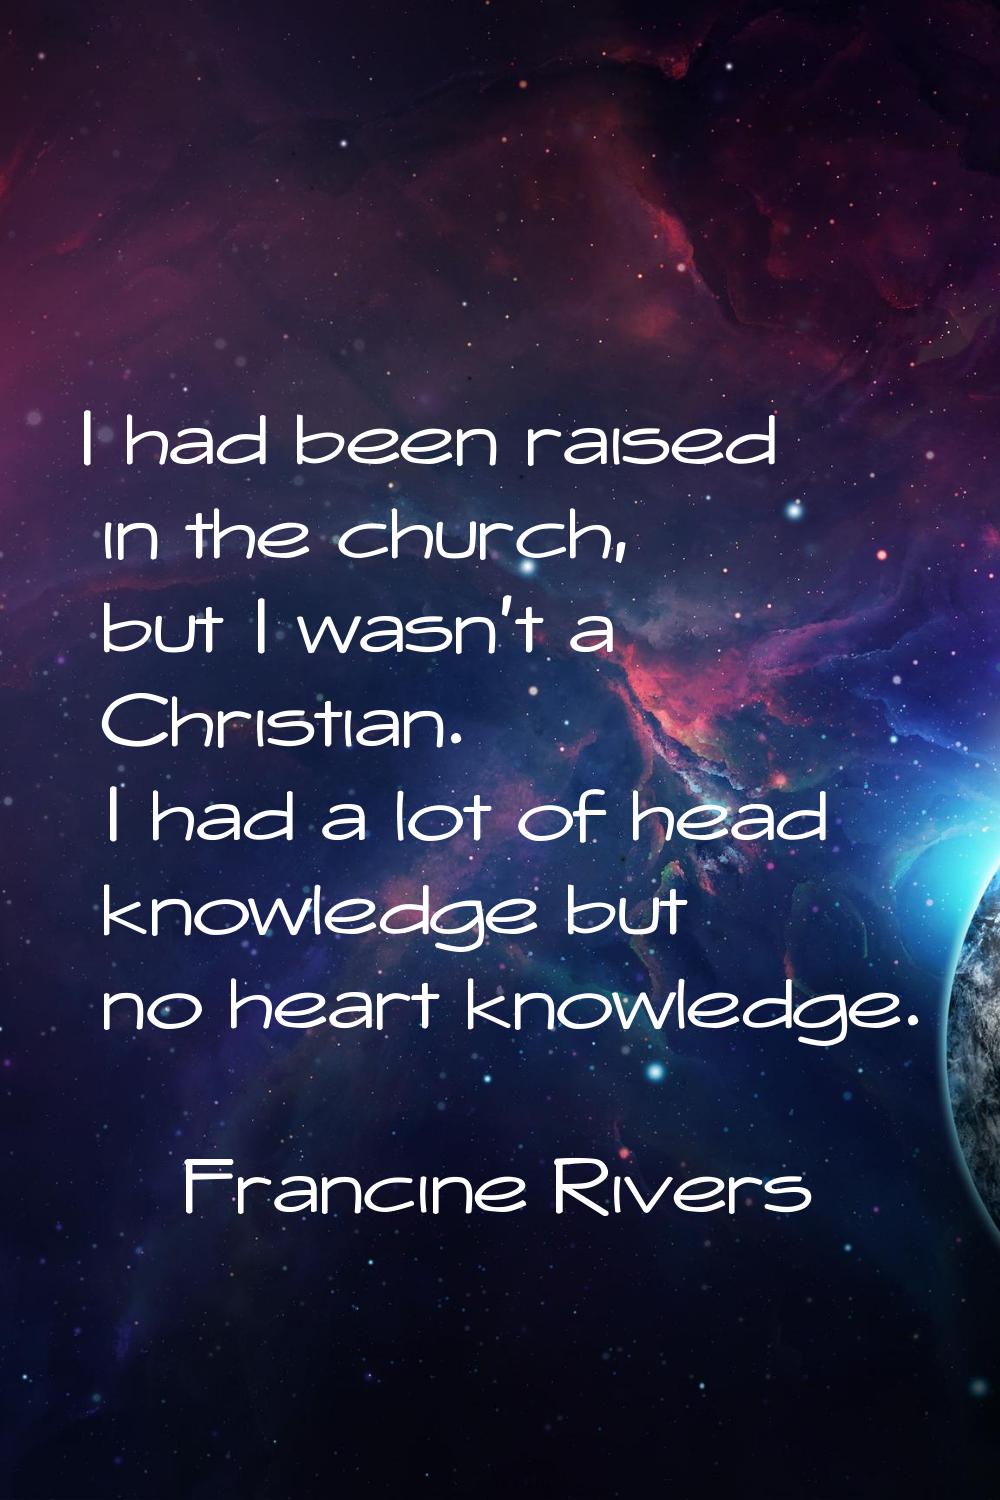 I had been raised in the church, but I wasn't a Christian. I had a lot of head knowledge but no hea